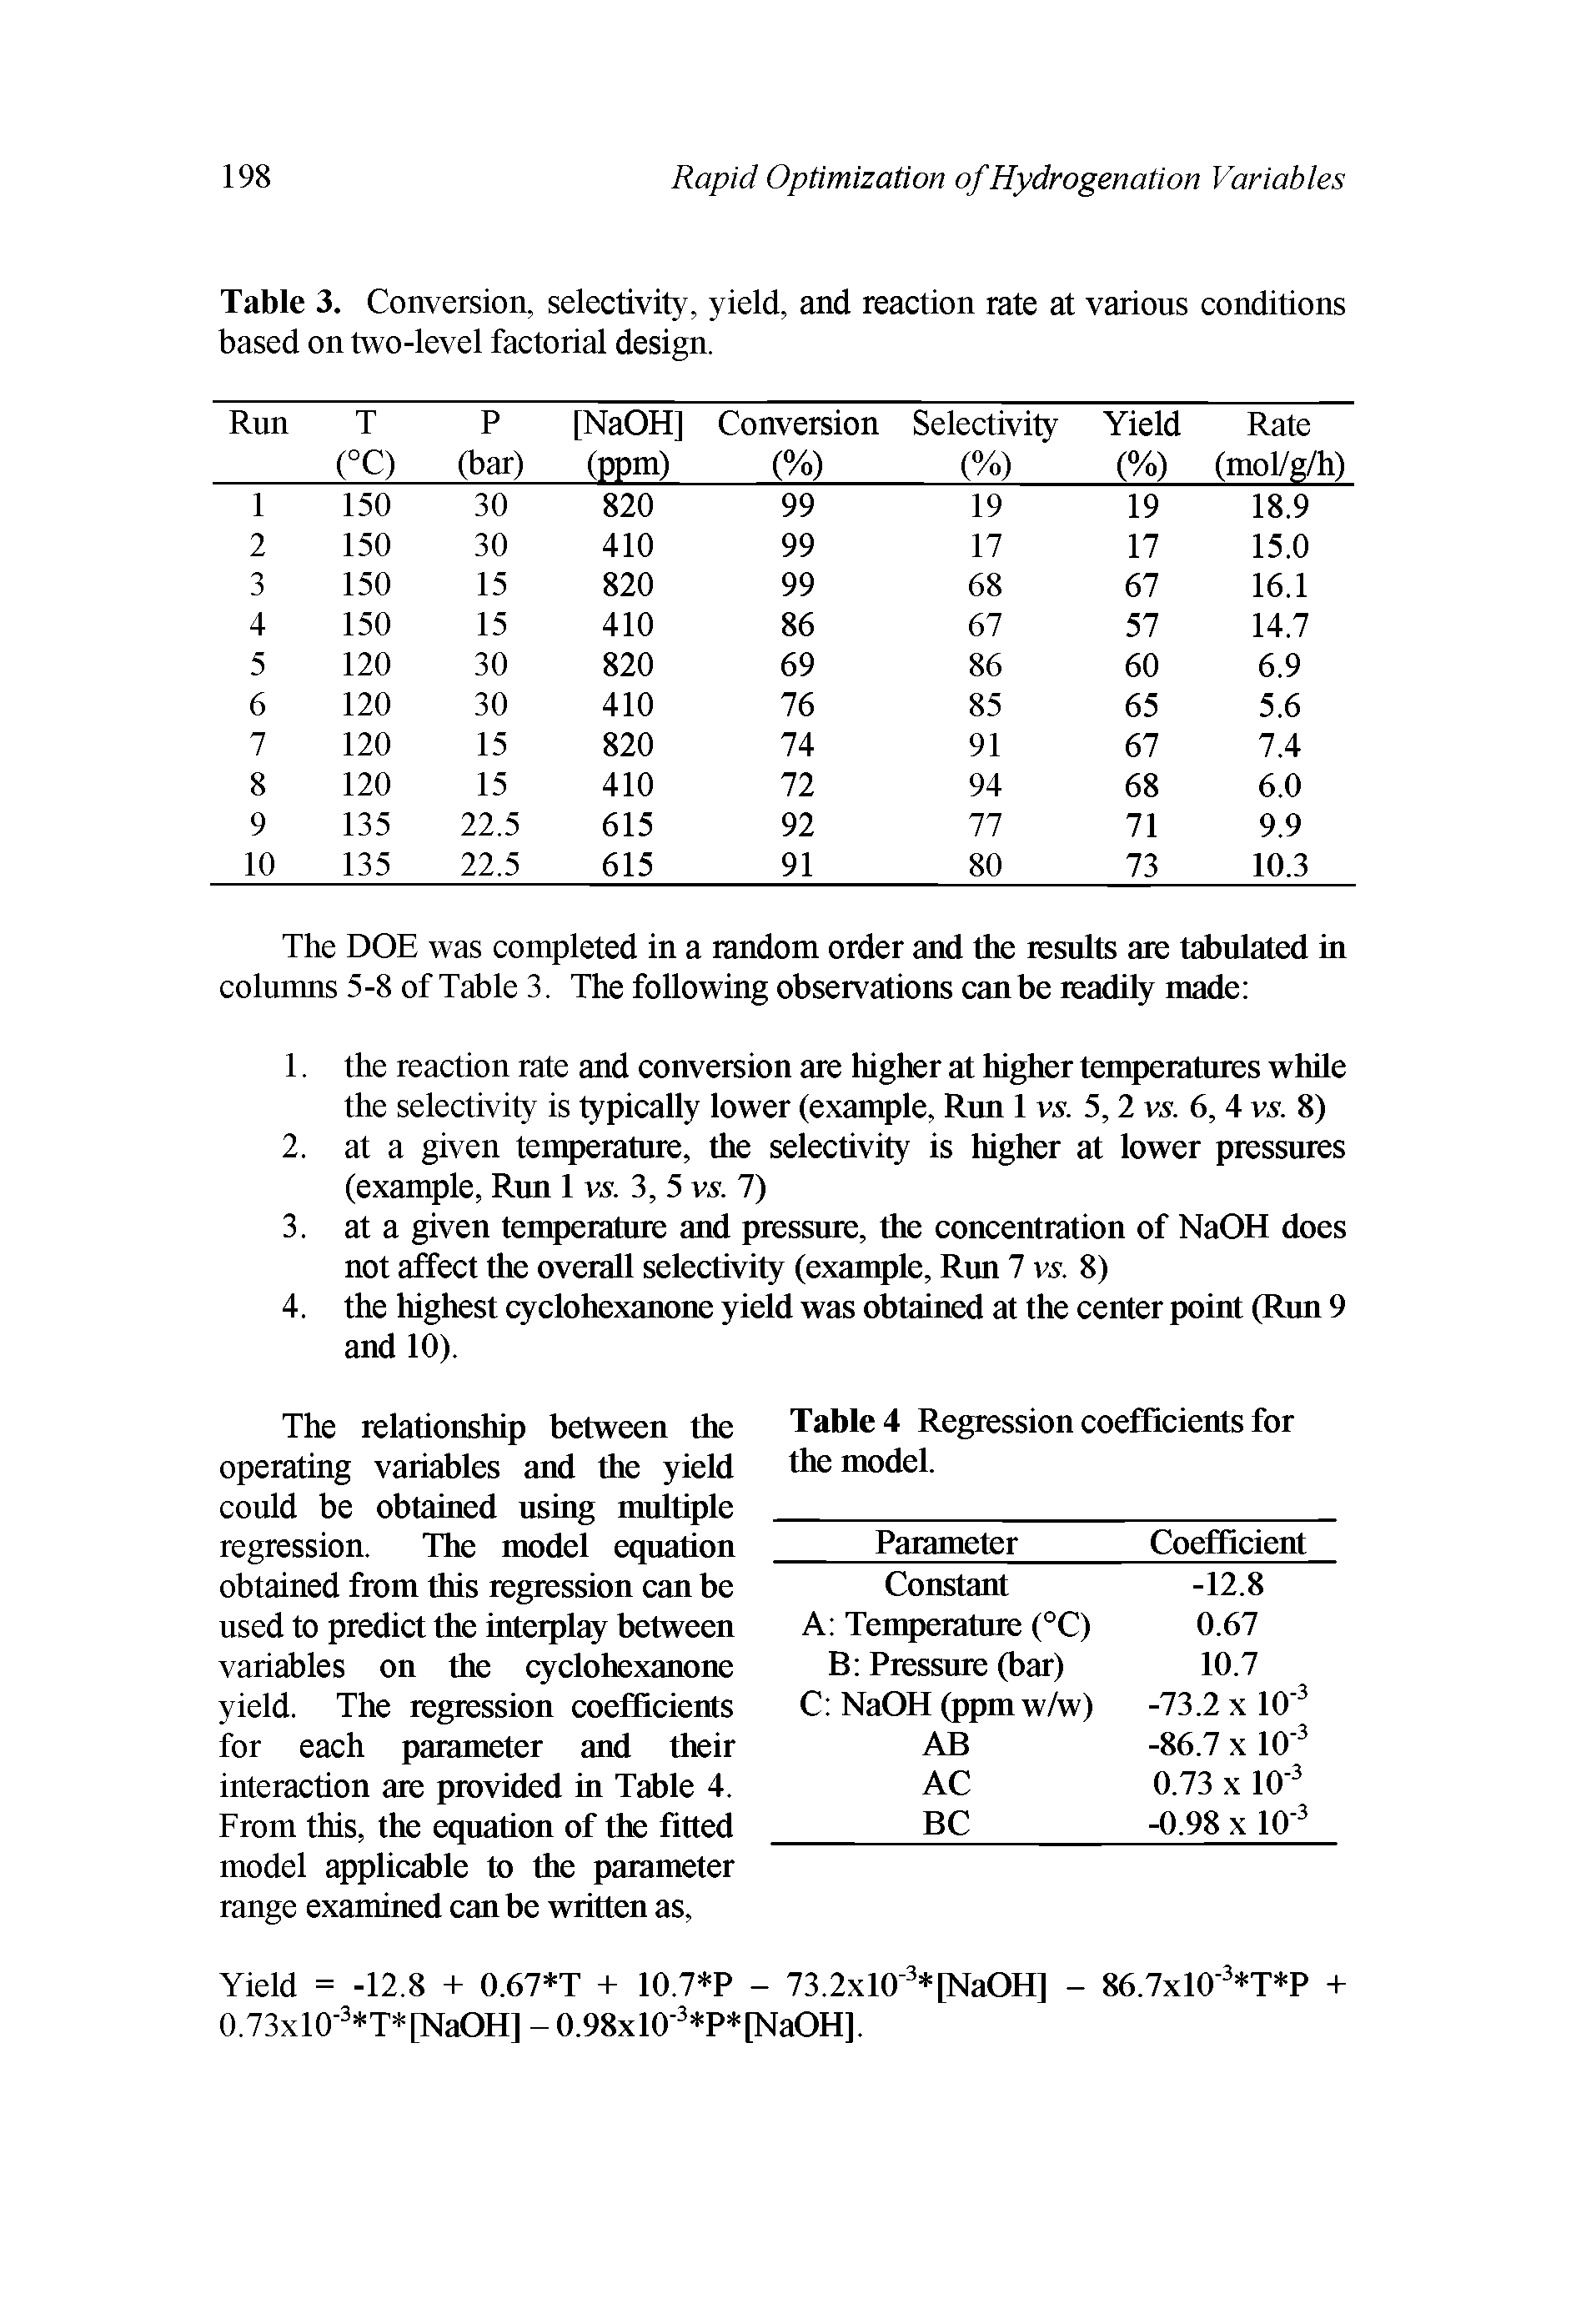 Table 3. Conversion, selectivity, yield, and reaction rate at various conditions based on two-level factorial design.